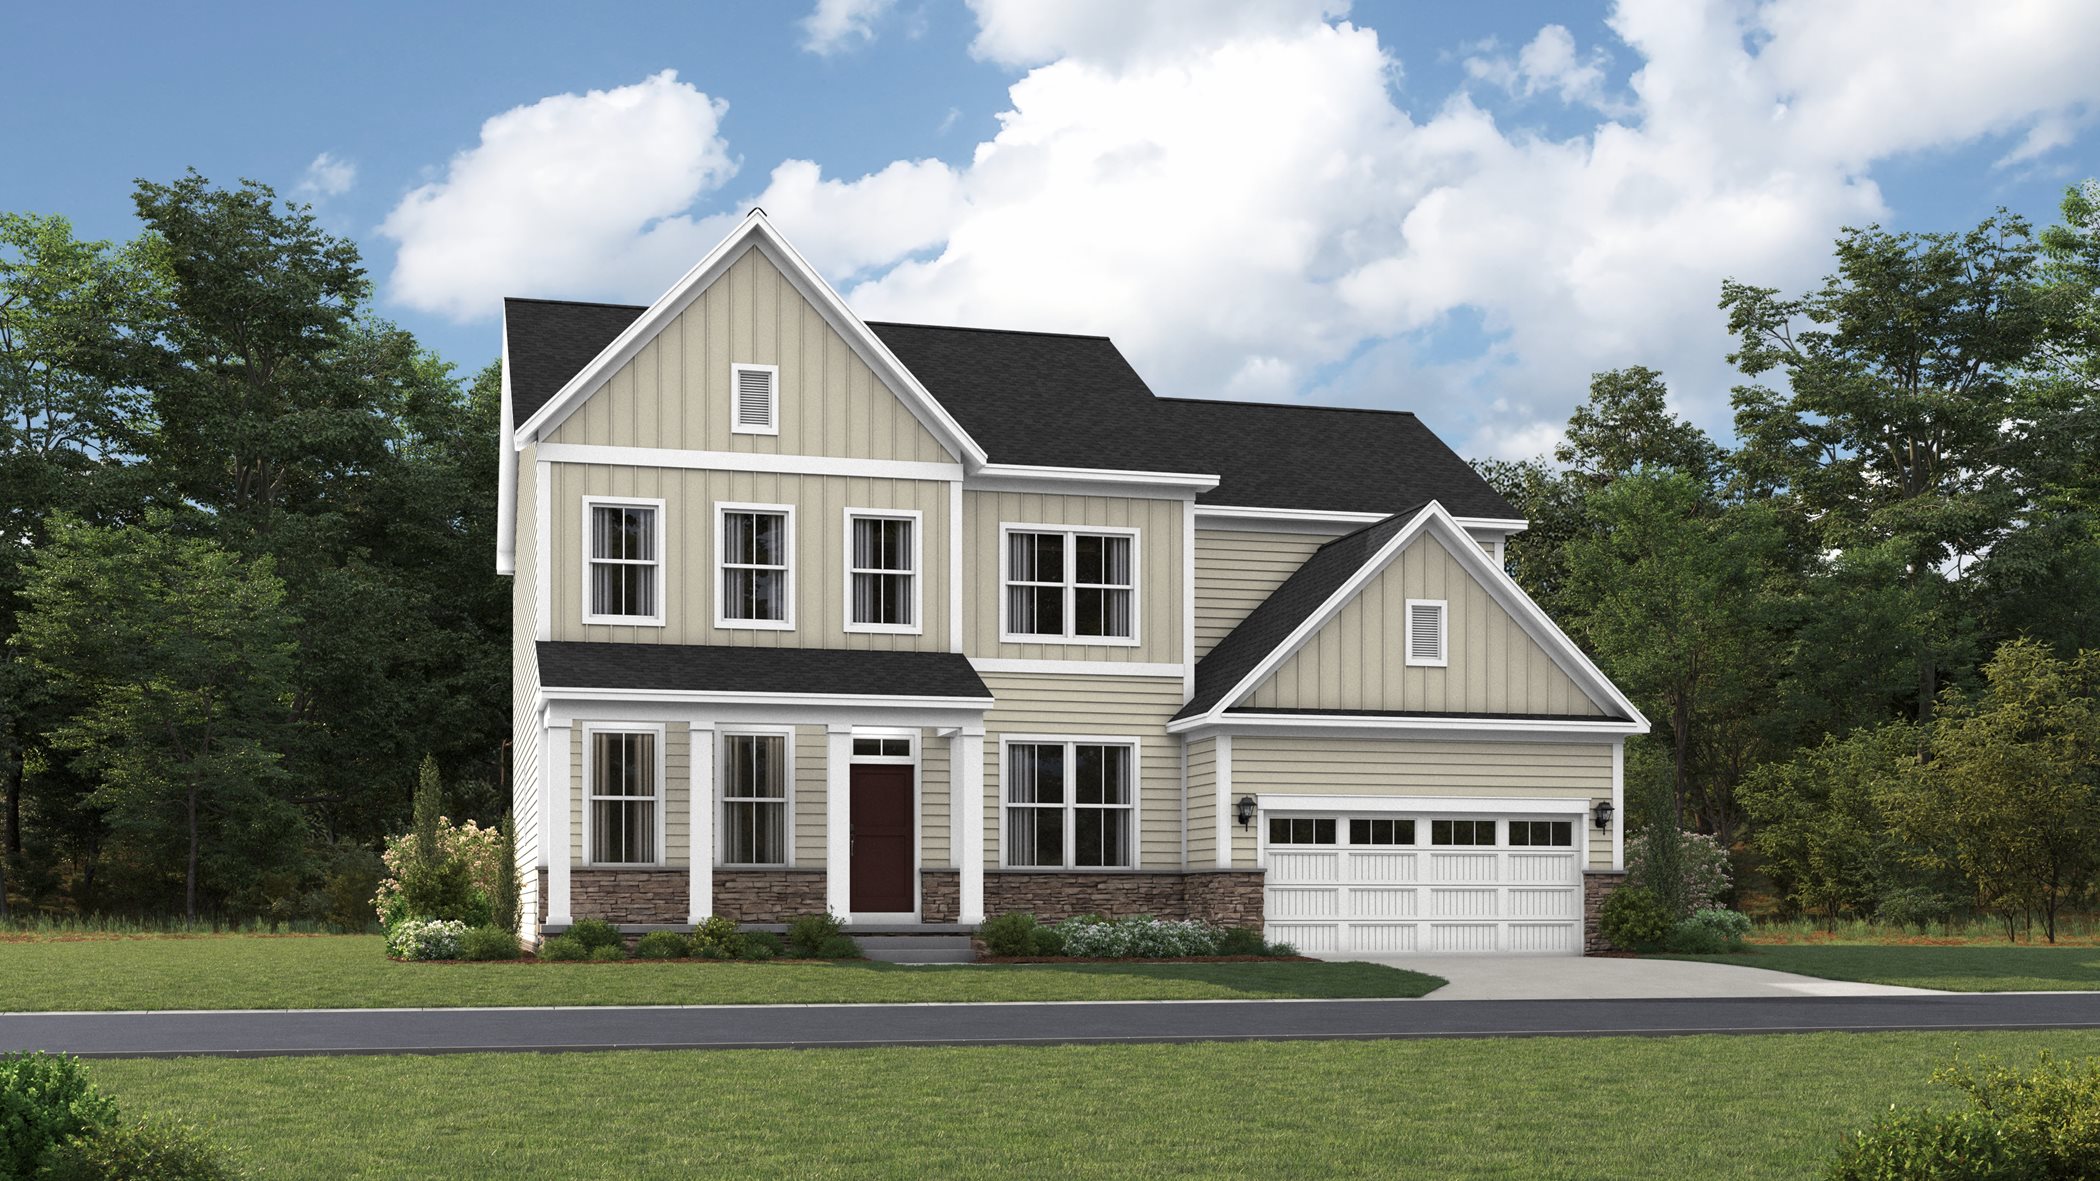 Harlow II Single Family Home at Harpers Mill